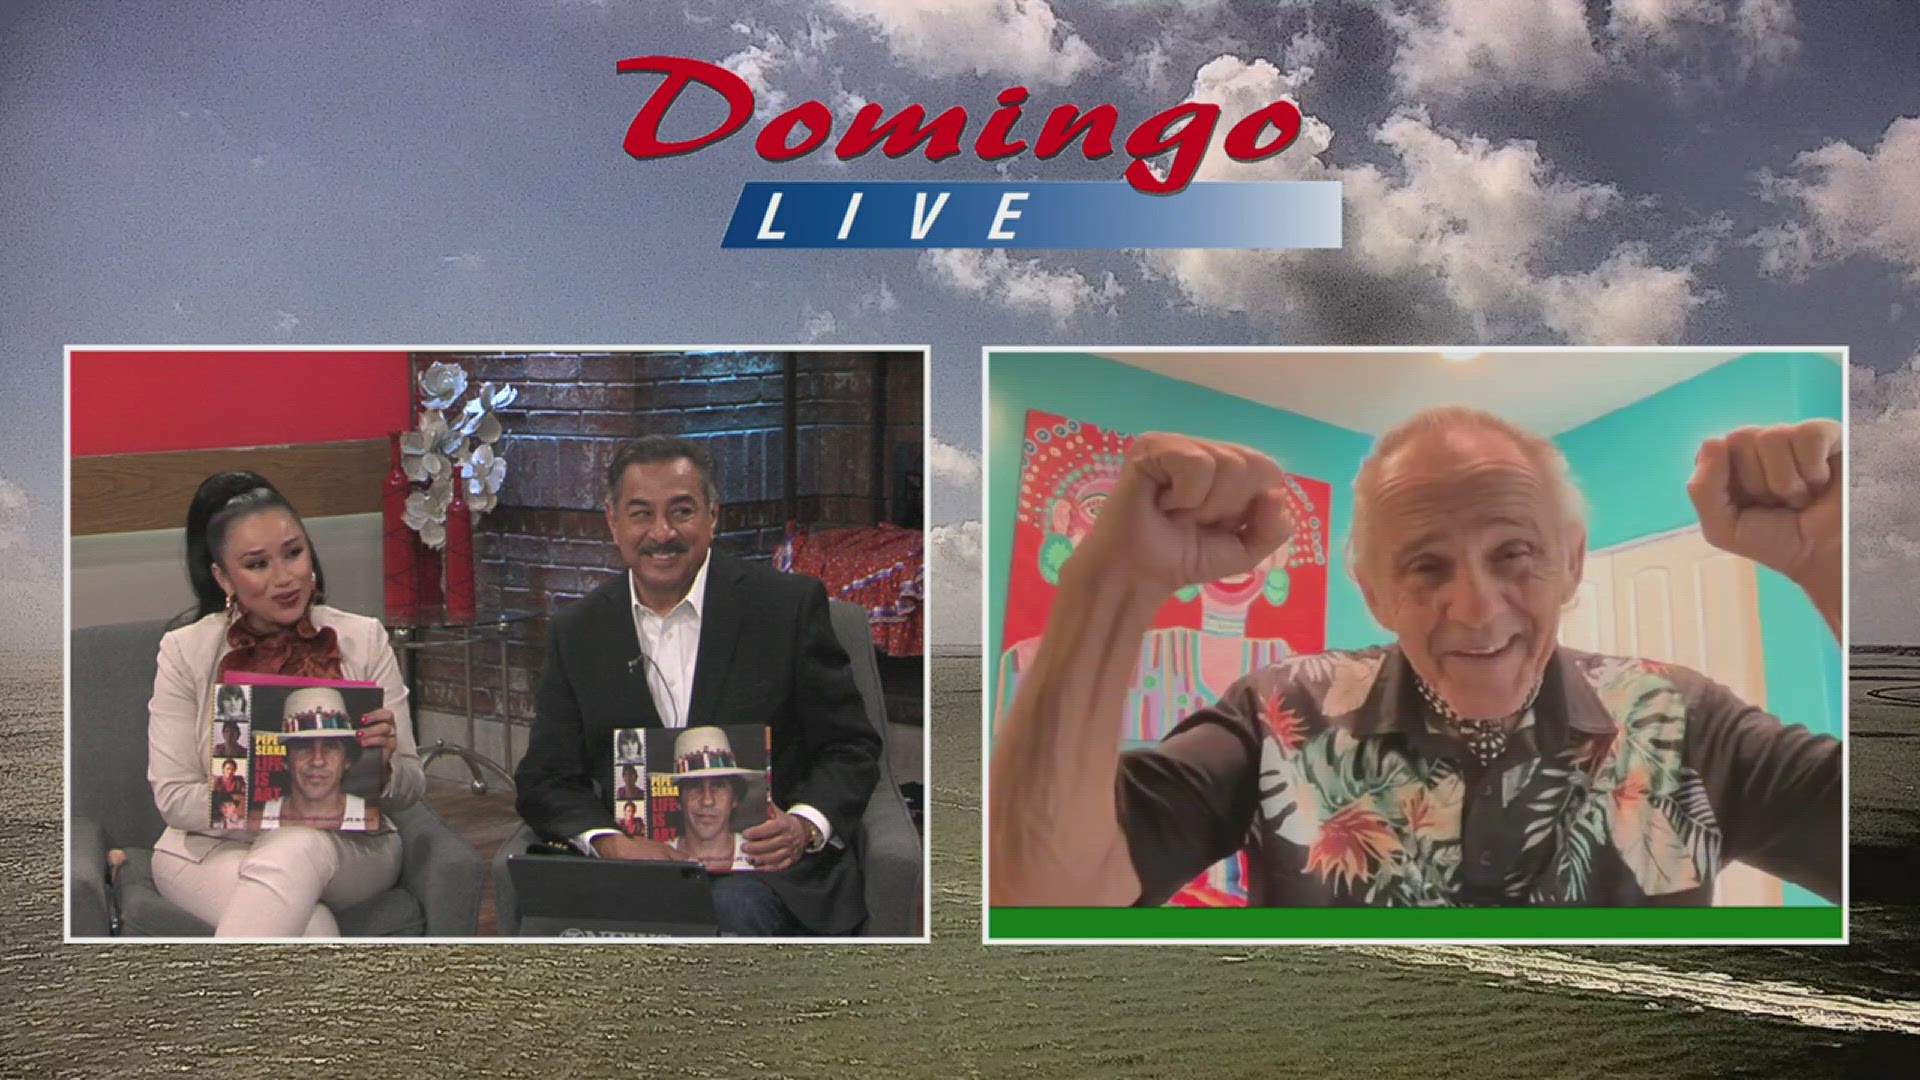 Artist, actor and filmmaker Pepe Serna joined us on Domingo Live to talk his new memoir and film, his beginning in Corpus Christi and bringing his success back home.